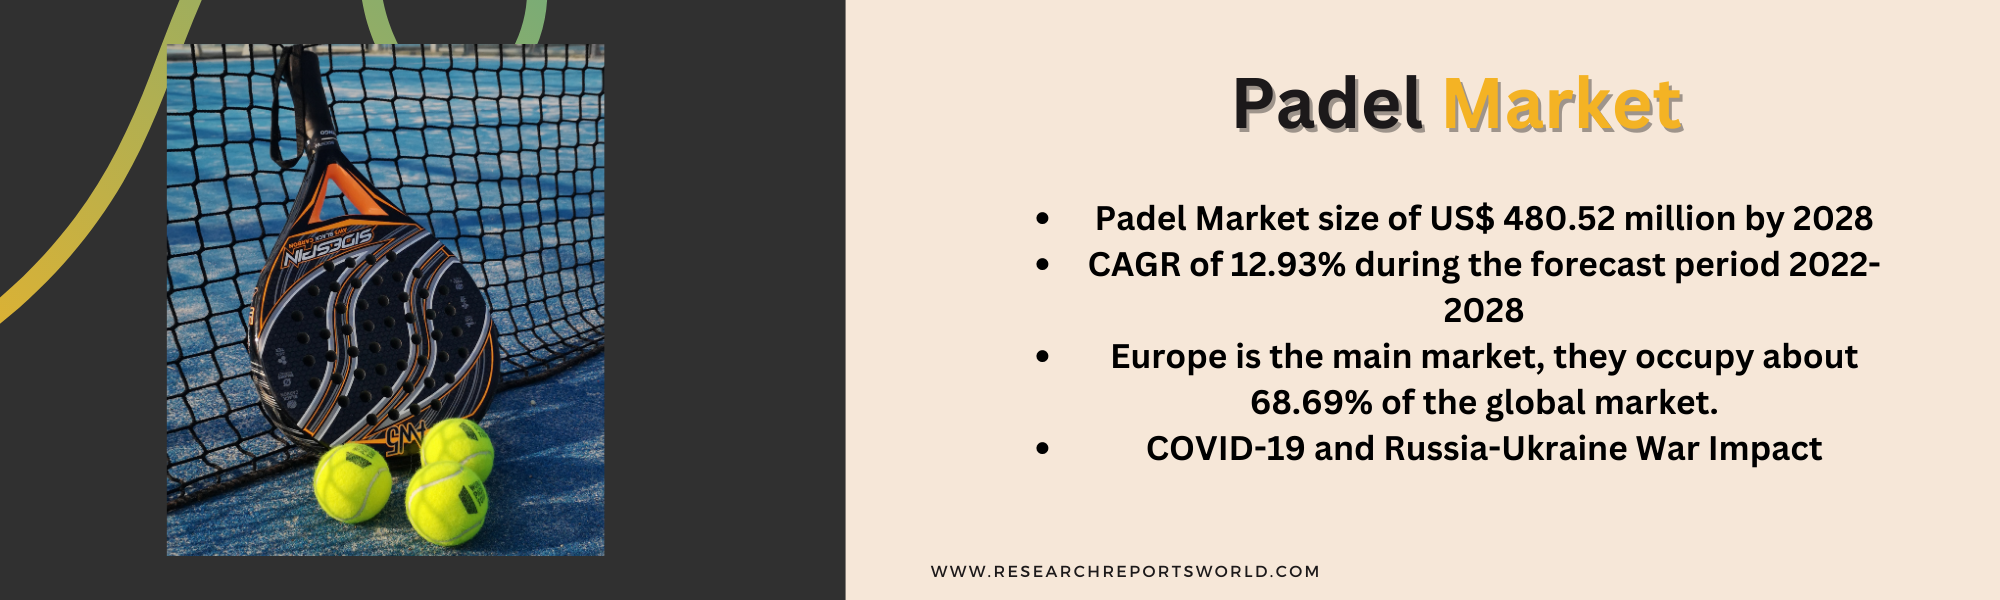 Global Padel Market 2023 | Trends in Services Industry by 2030